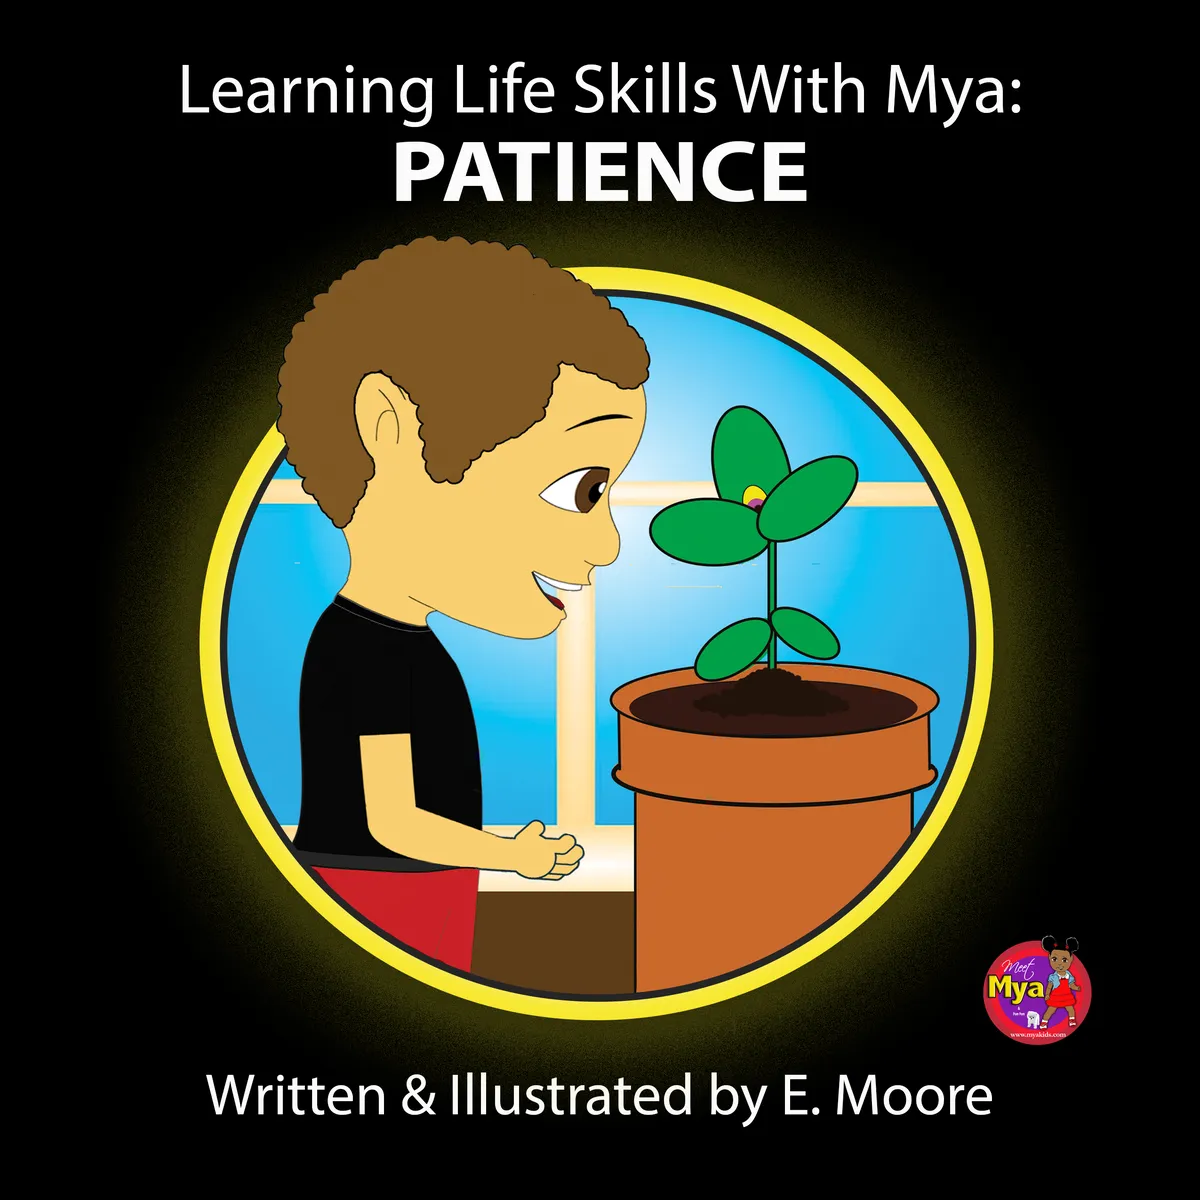 Learning Life Skills With MYA: PATIENCE